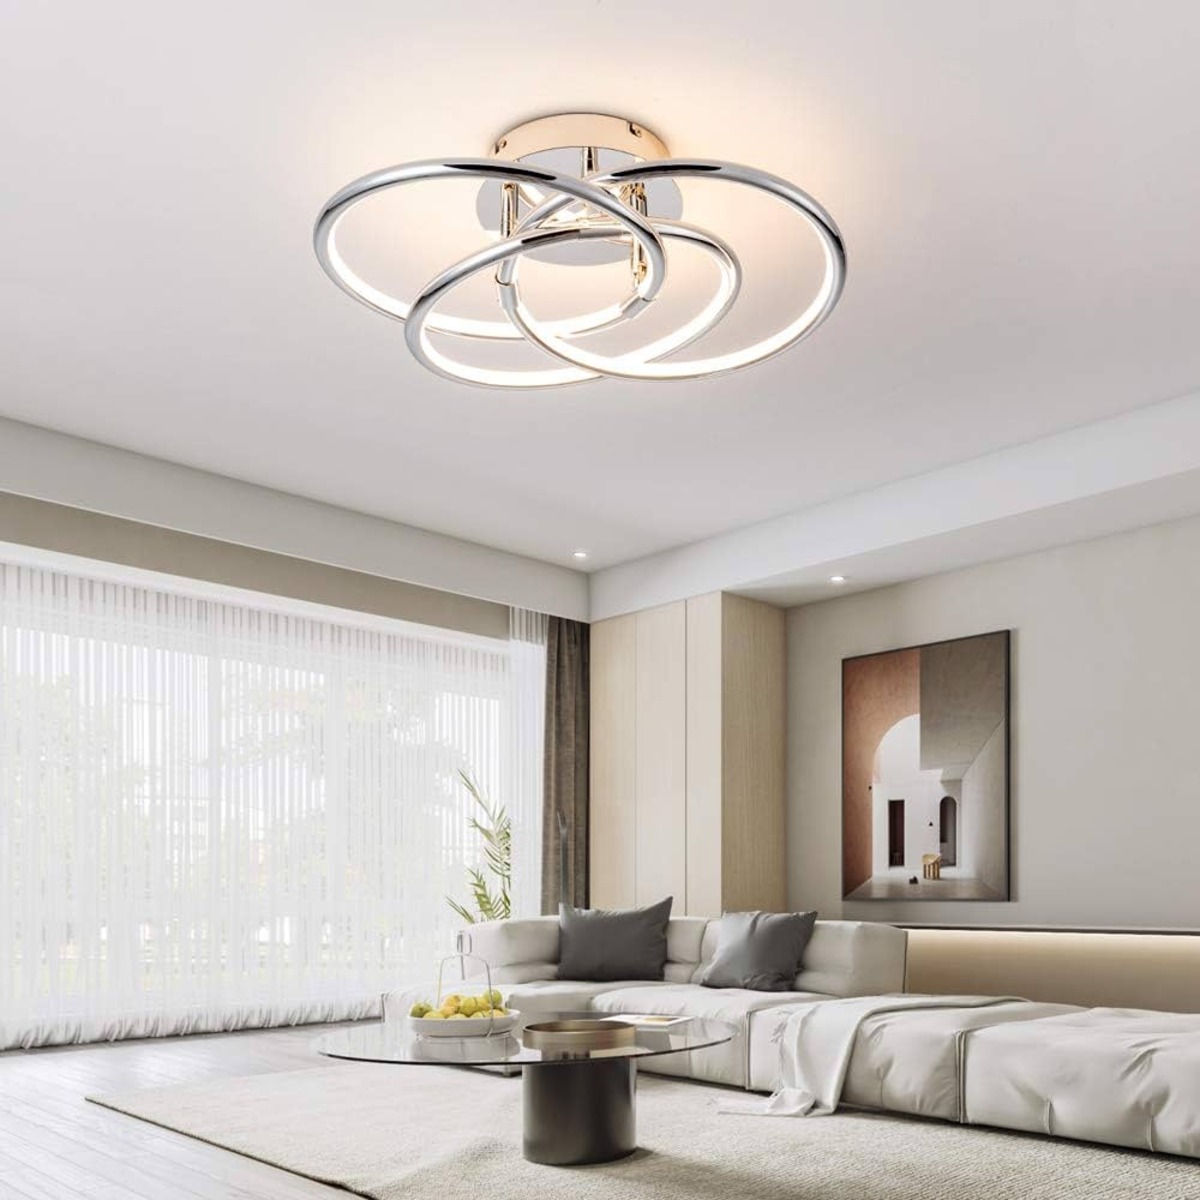 How To Install A Ceiling Lamp